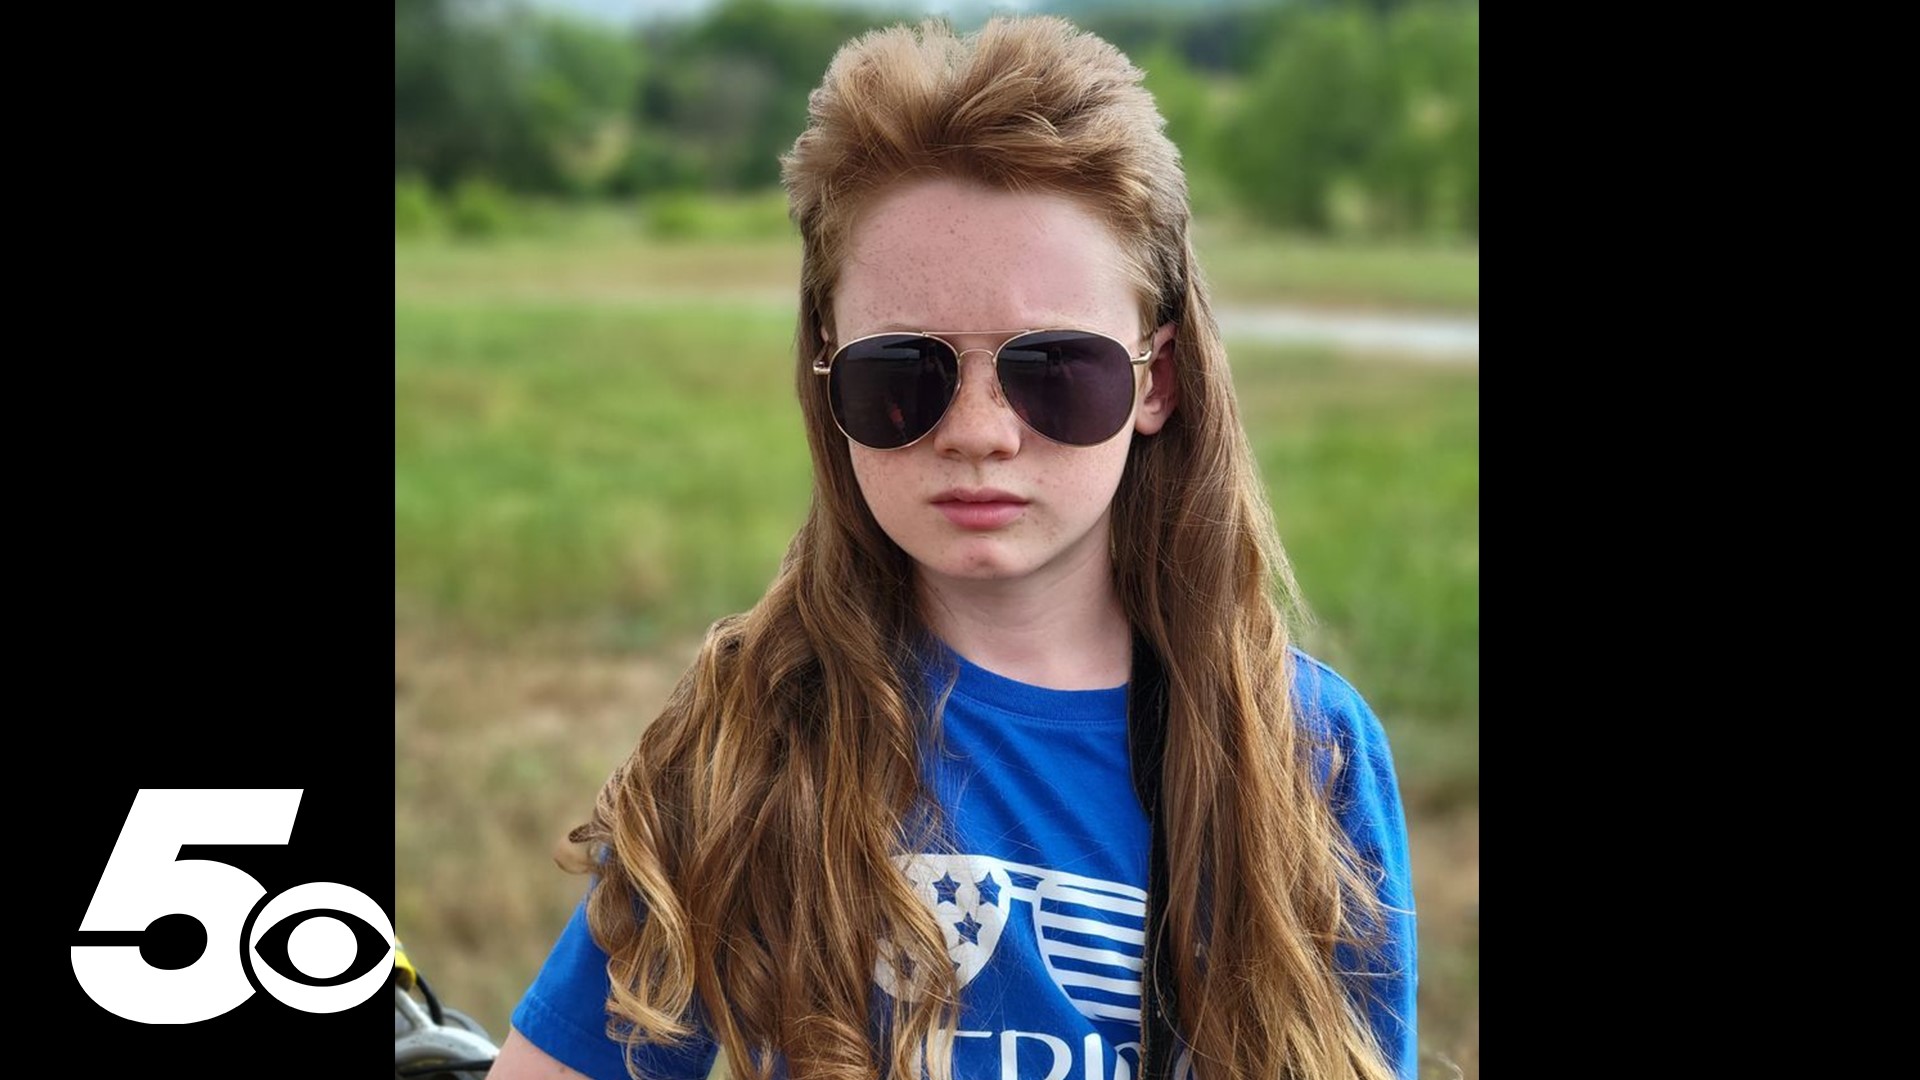 12-year-old Rowan from Wesley has advanced to the second round of the USA Mullet Championship and is hoping to make it to the third with the help of voters.